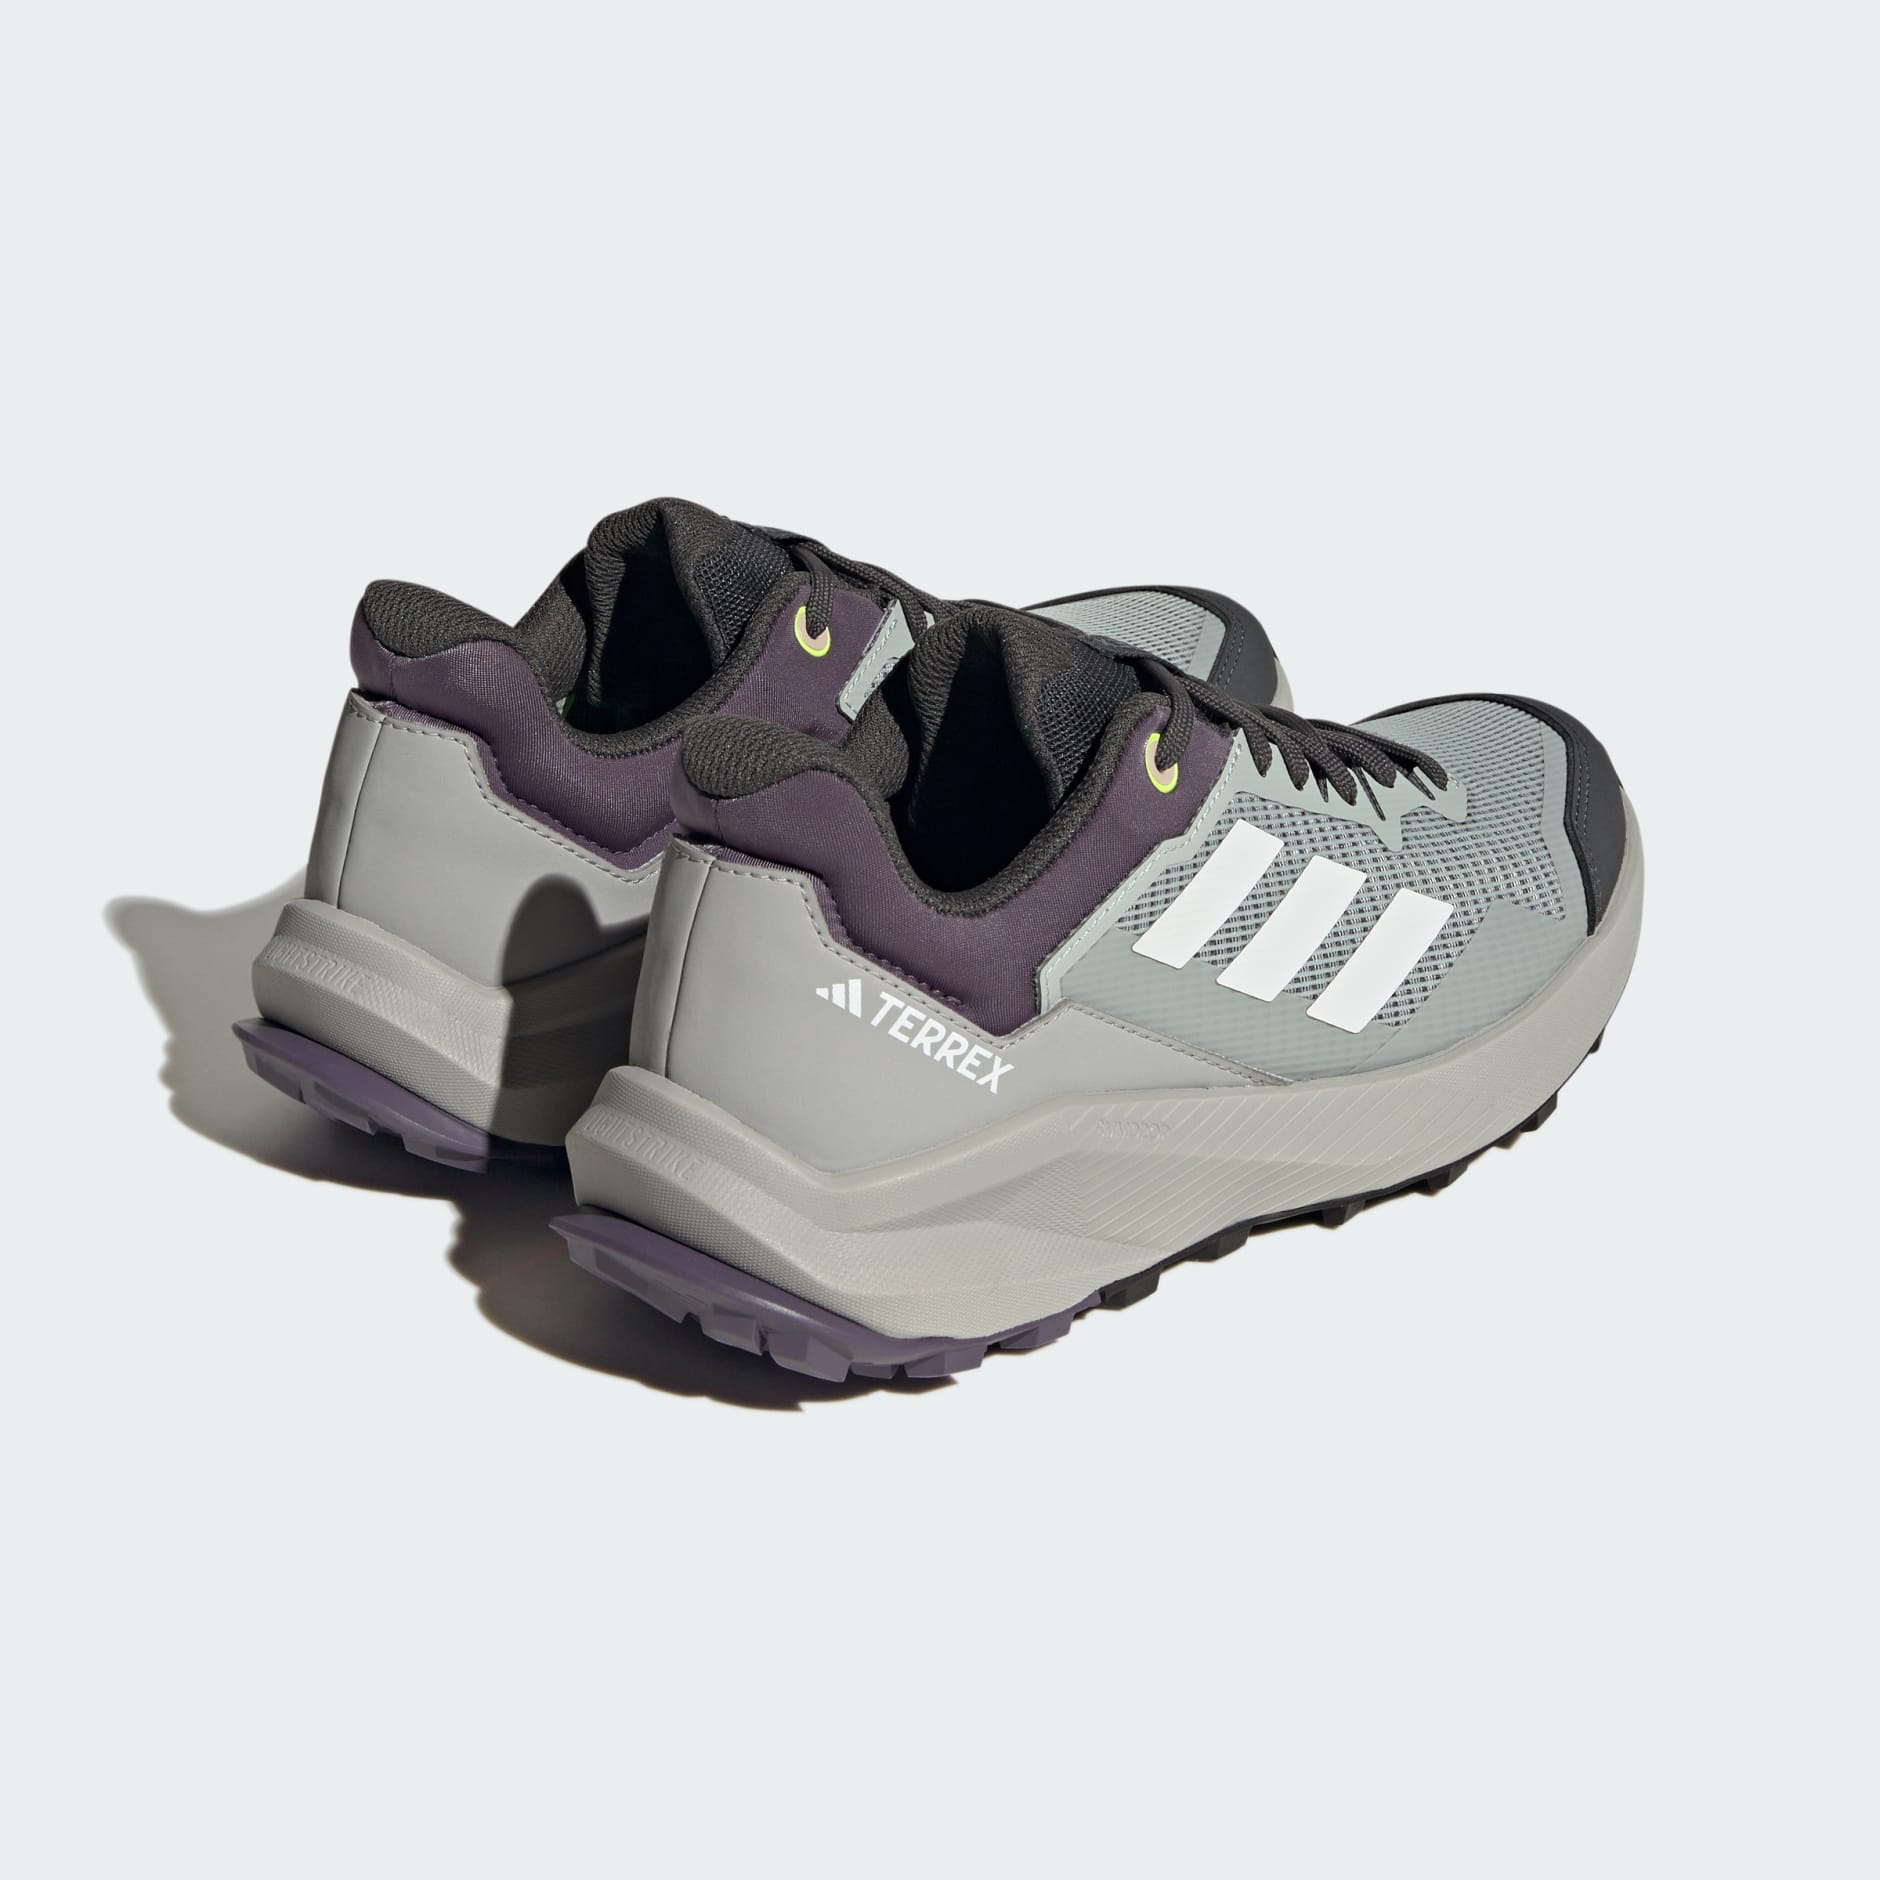 Shoes - Terrex Trail Rider Trail Running Shoes - Grey | adidas South Africa